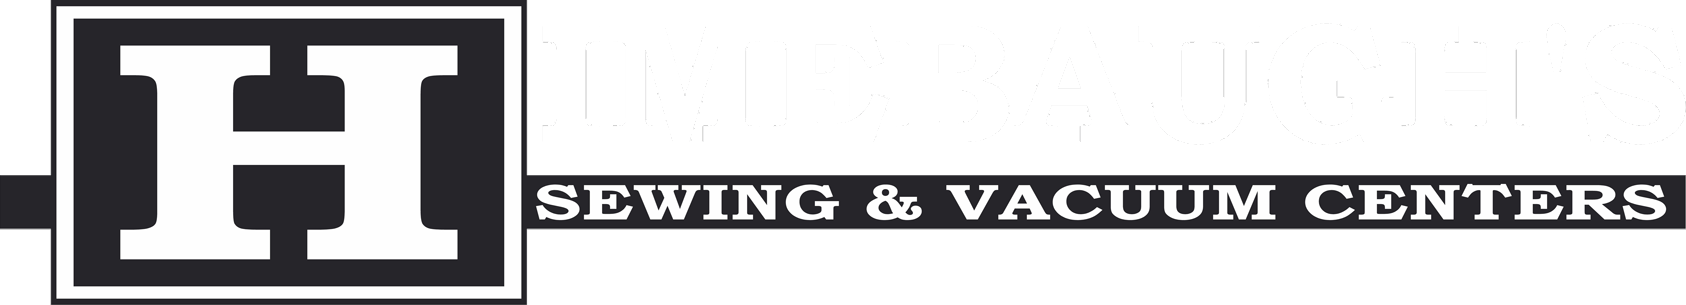 Himebaugh’s-Sewing-and-Vacuum-Center-Logo